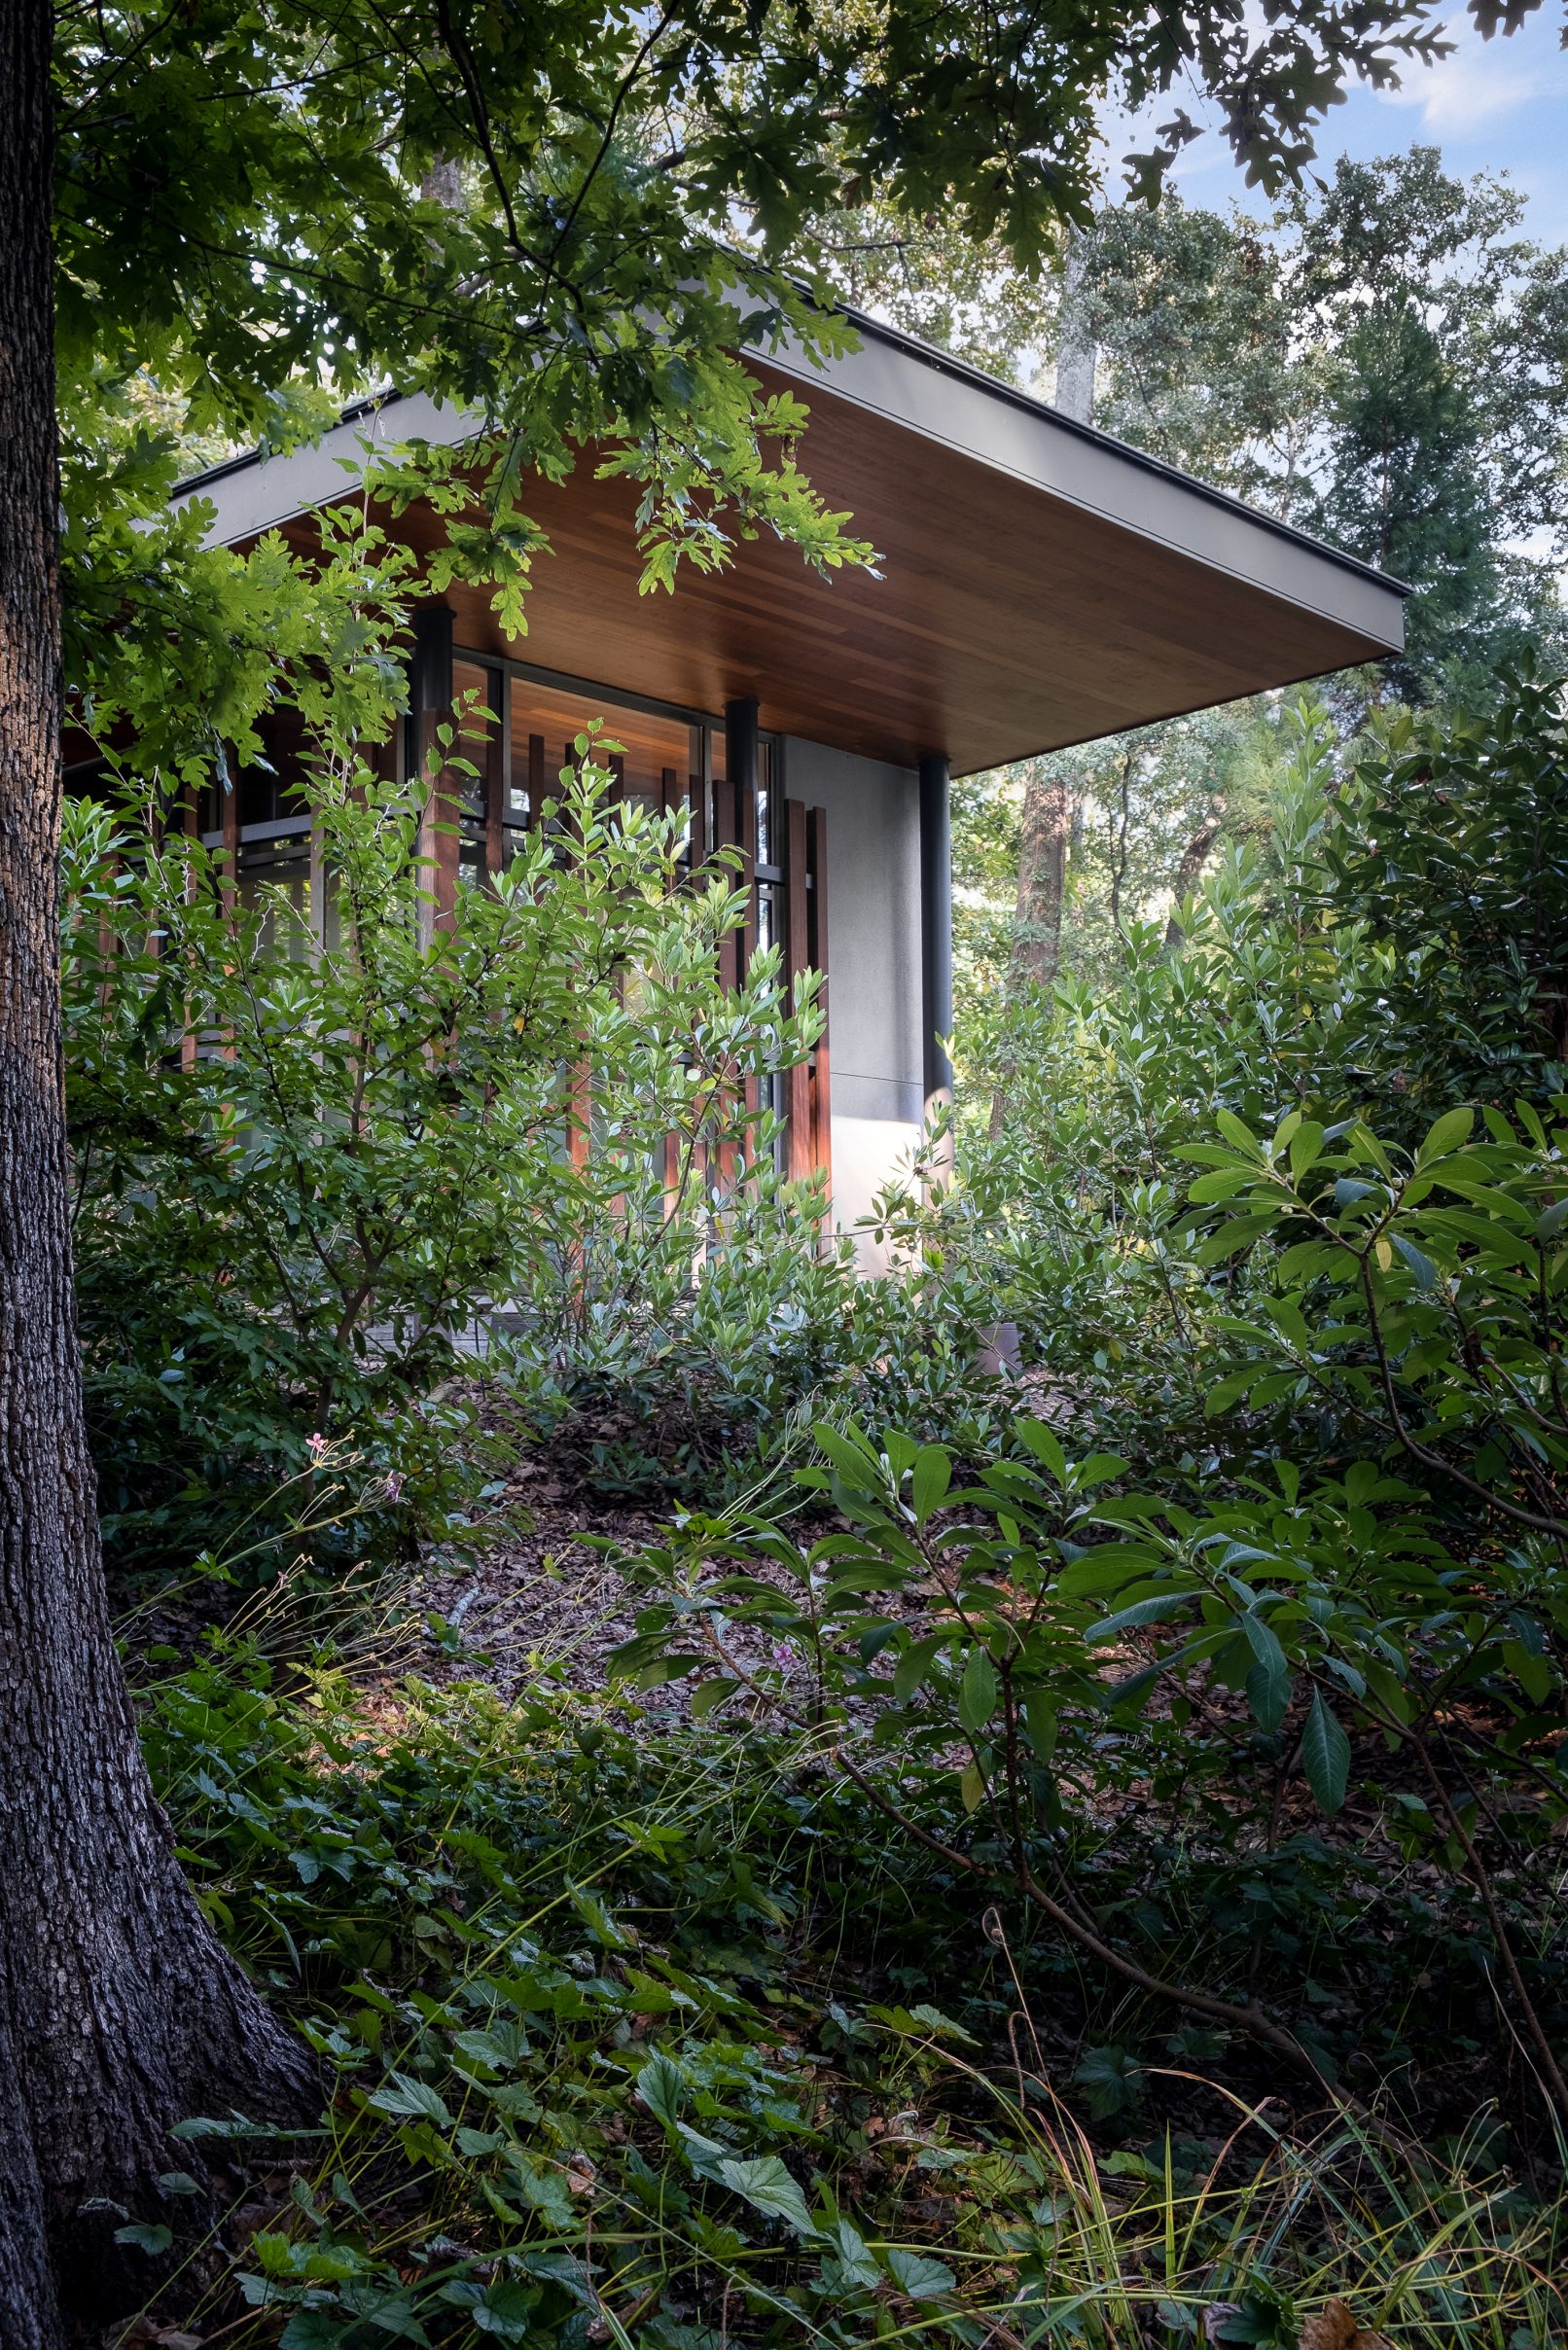 Architectural photography of a building rising out of a thicket of trees and bushes